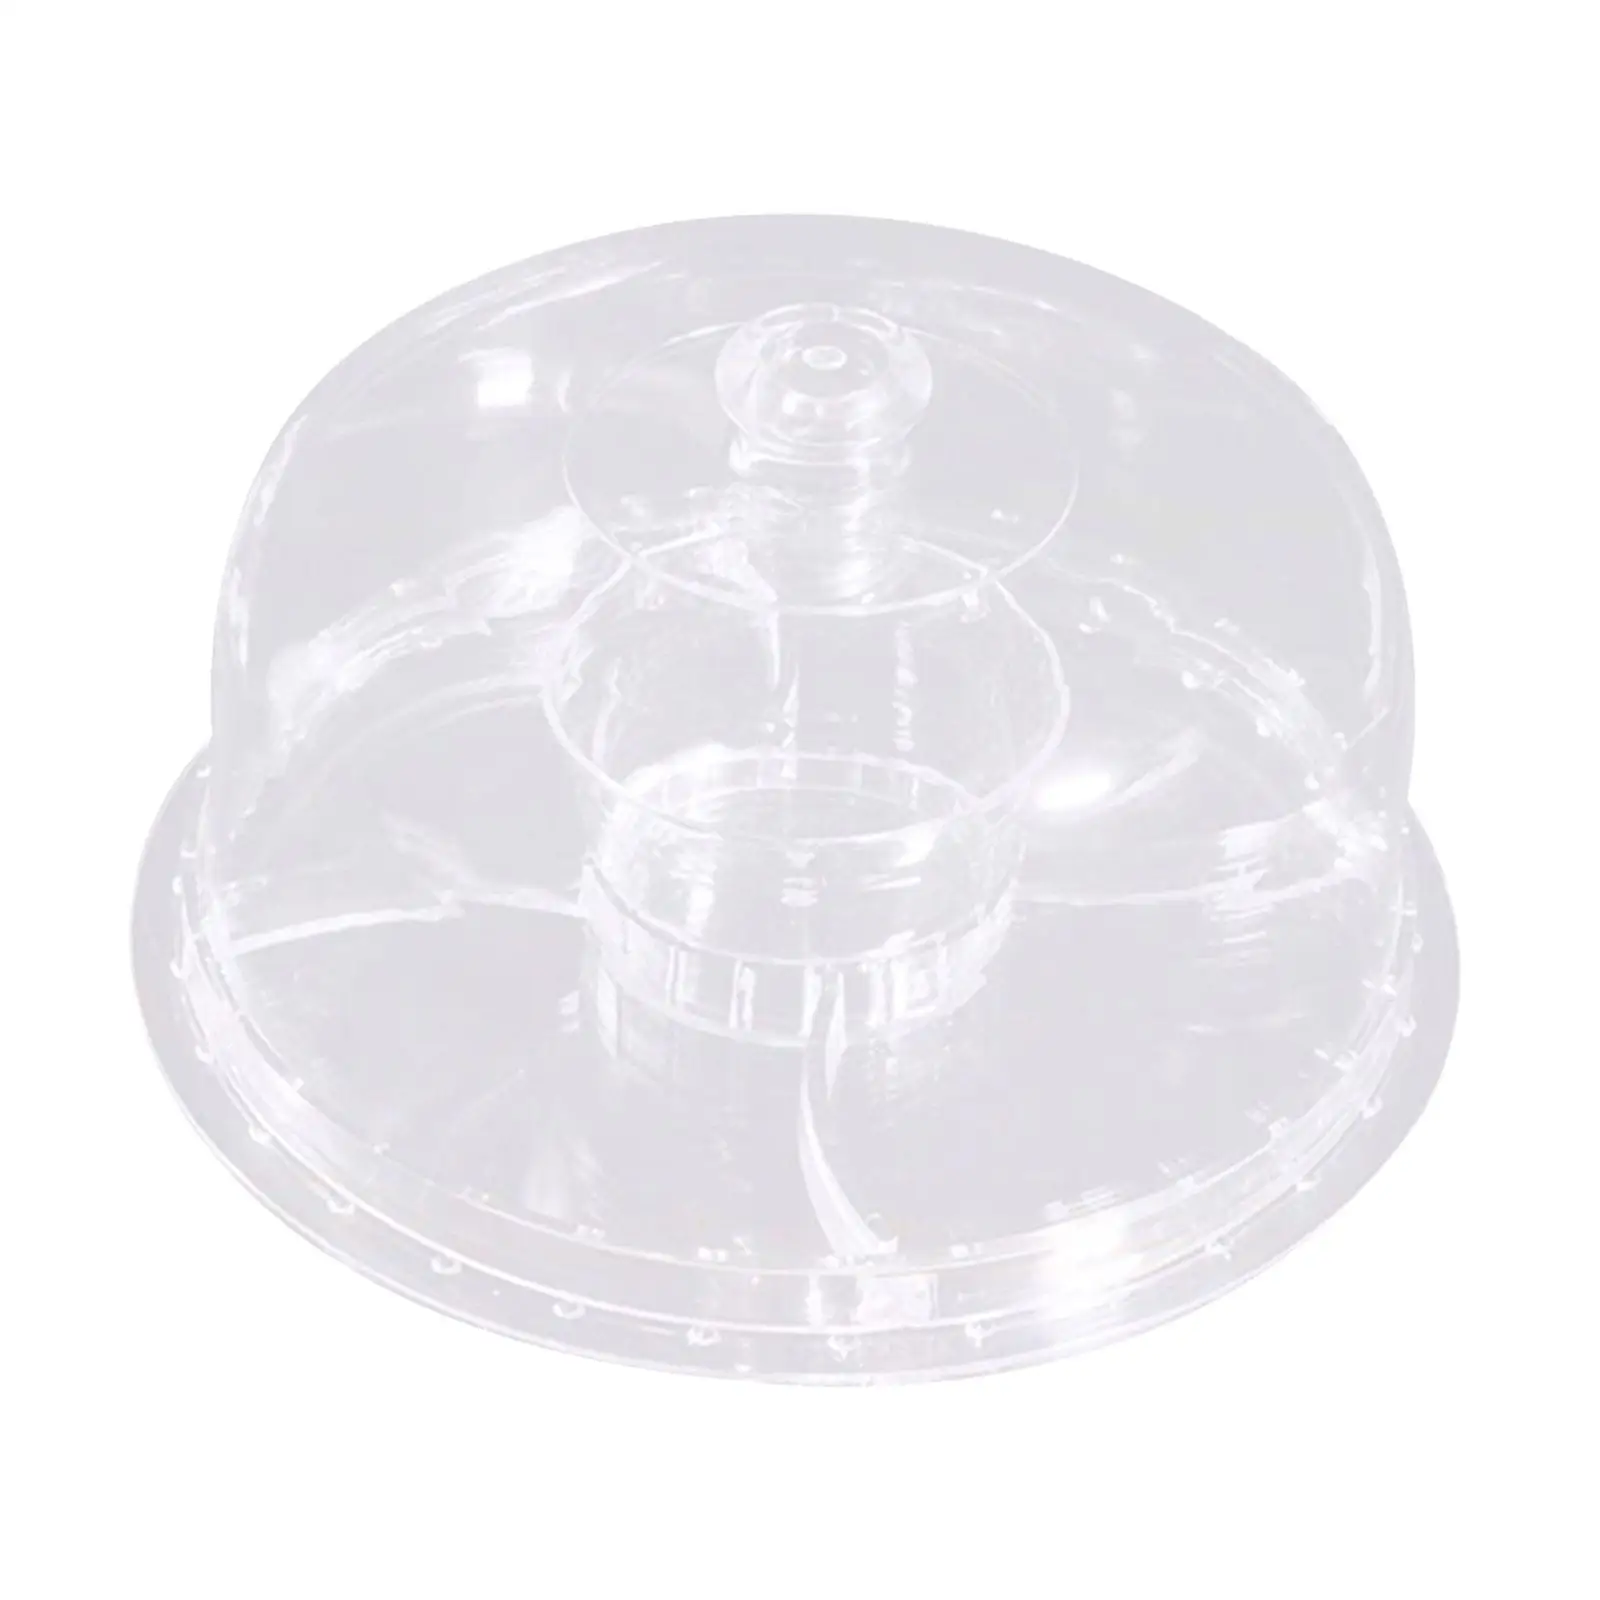 Snack Tray Serving Tray Clear Cupcake Holder Dessert Plate for Muffins Pastries Appetizers Baby Shower Wedding Centerpieces